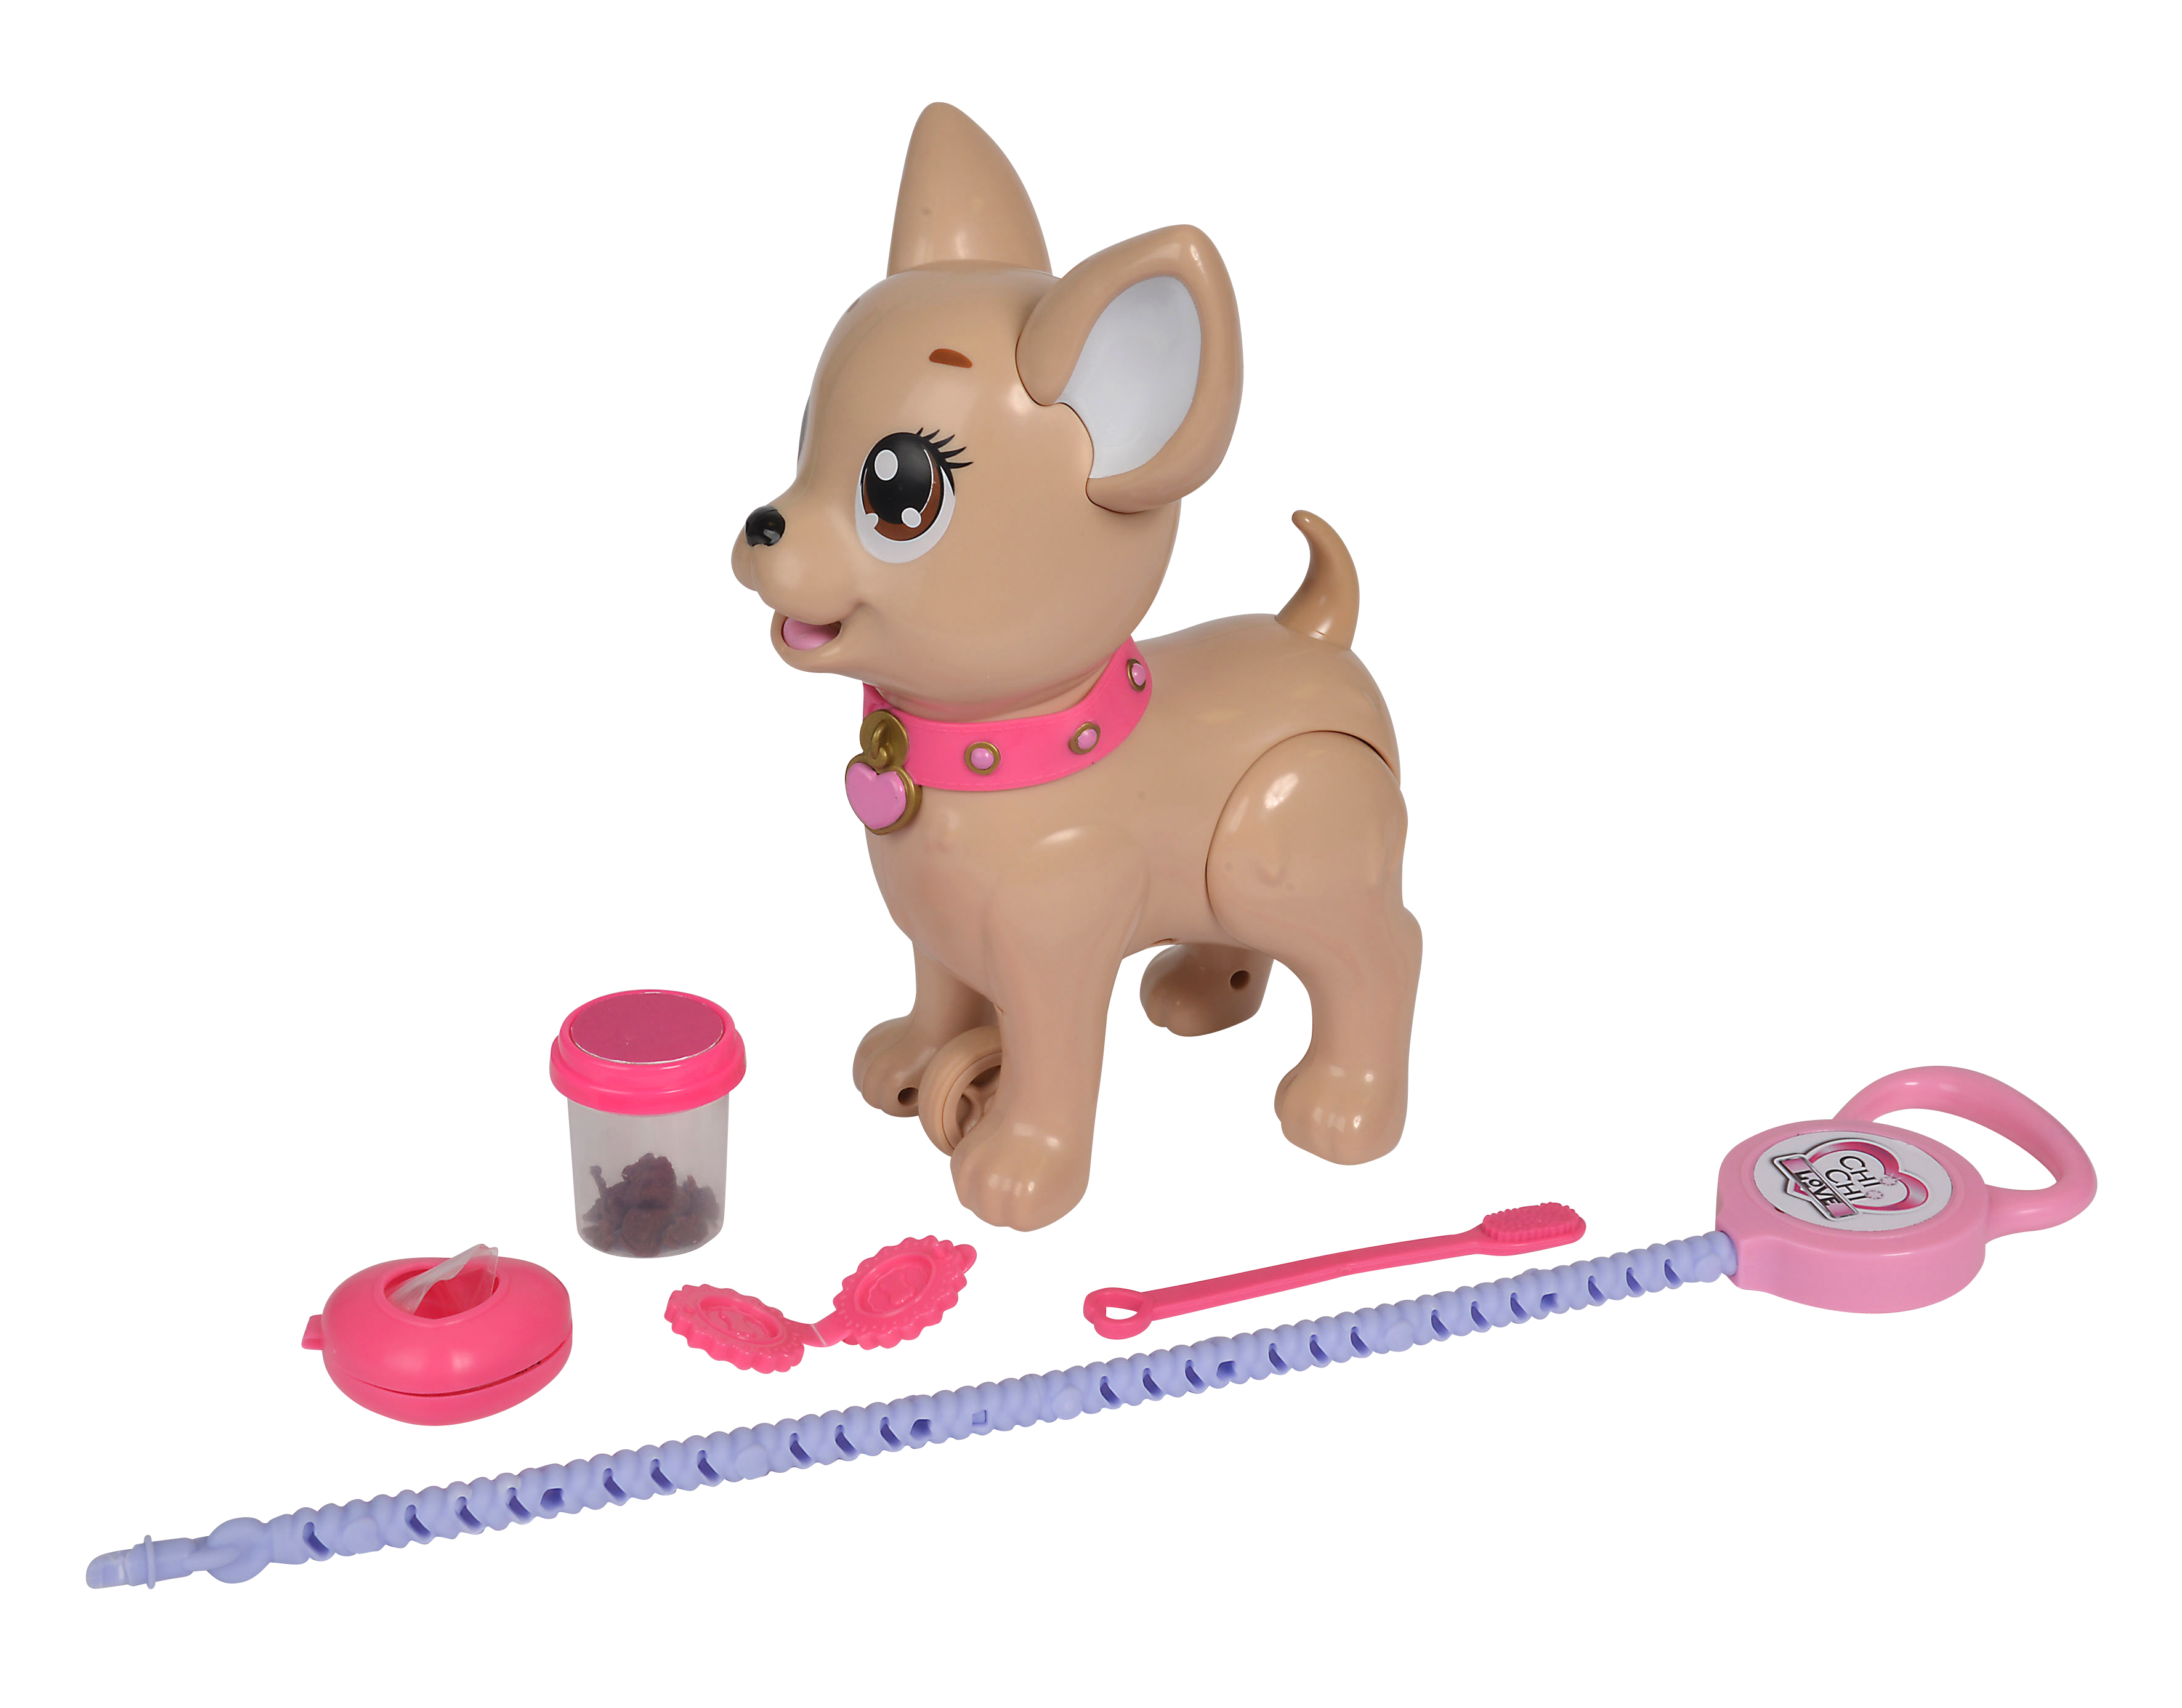 SIMBA TOYS Poo Love Puppy Poo Mehrfarbig Funktionsspielzeug Chi Chi